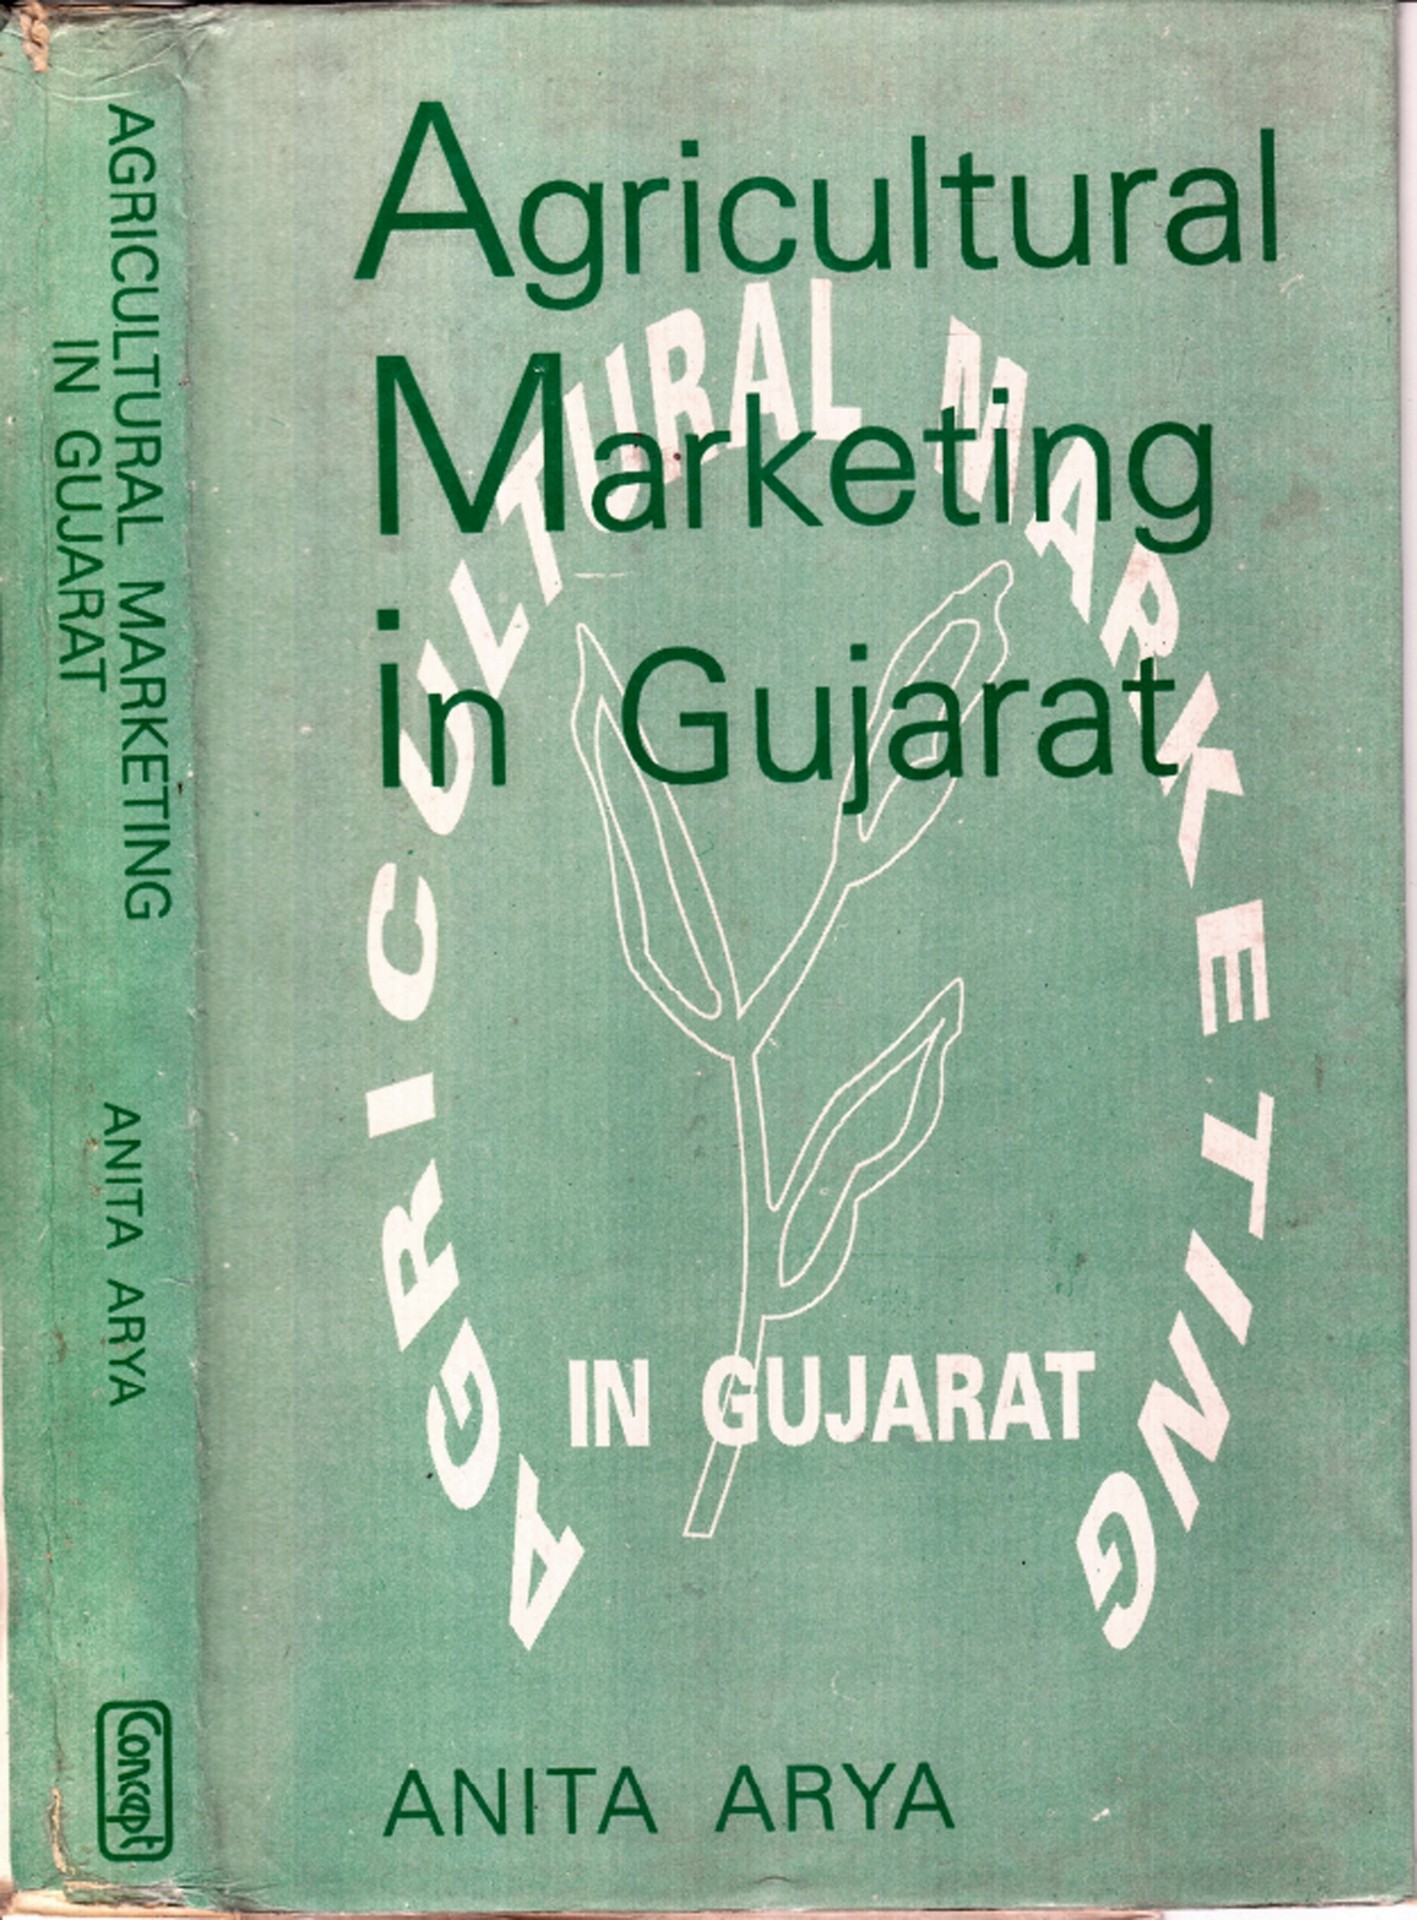 Agricultural Marketing In Gujarat